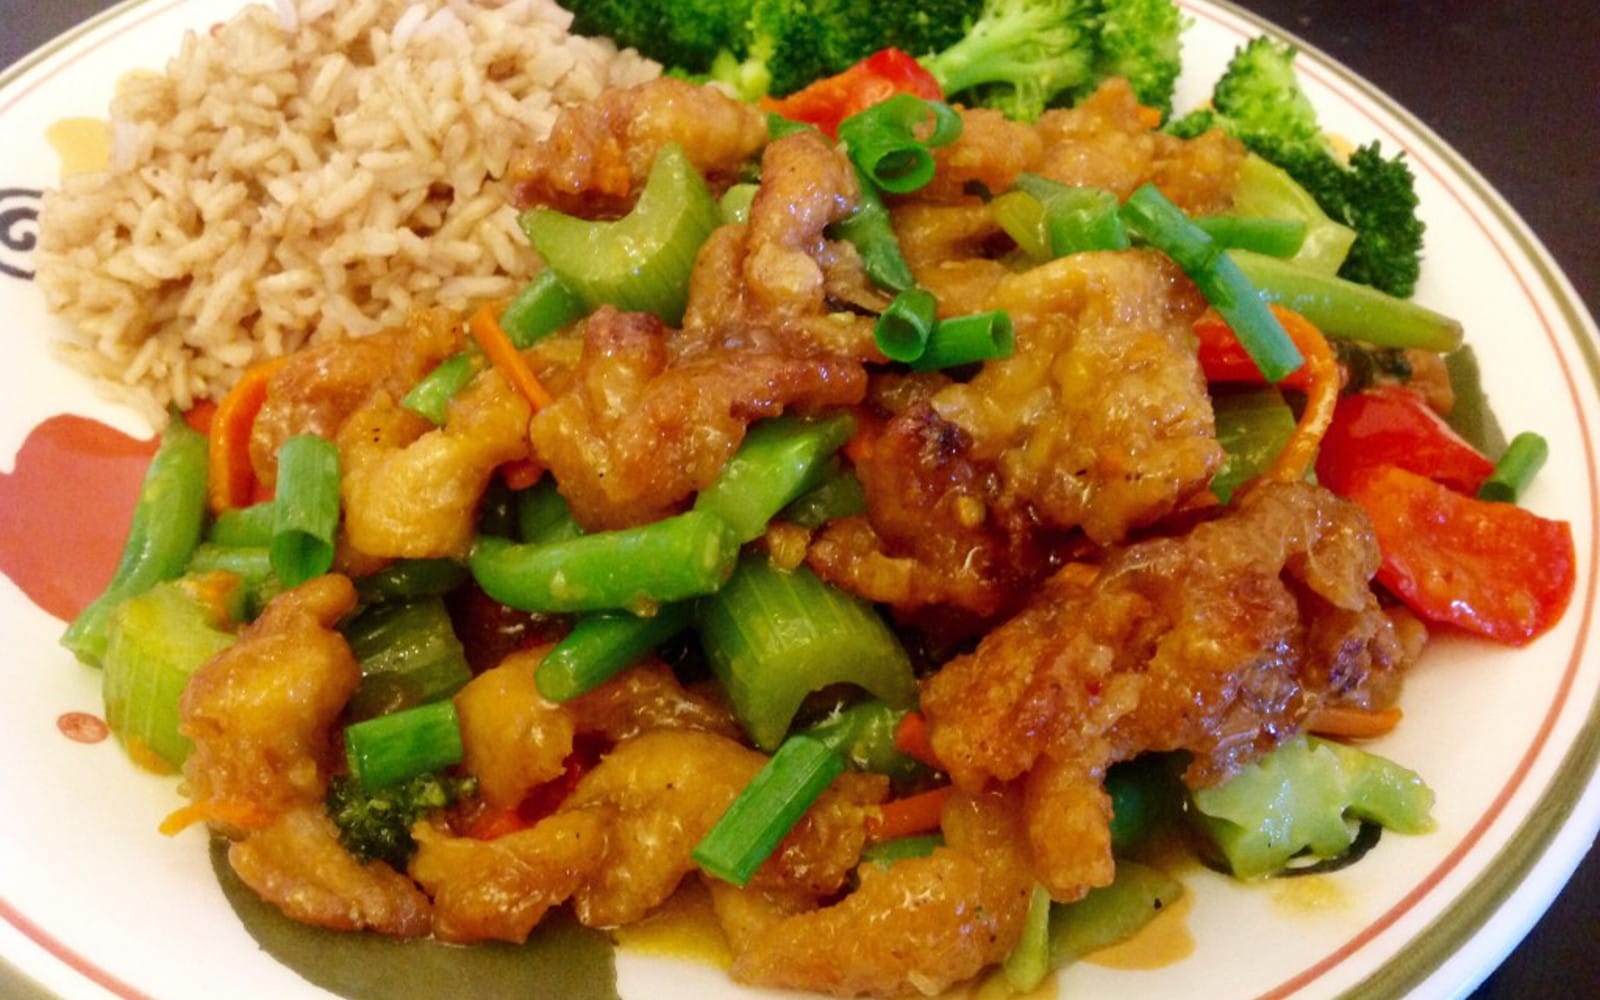 Orange 'Chicken' With Mixed Vegetables and Brown Rice